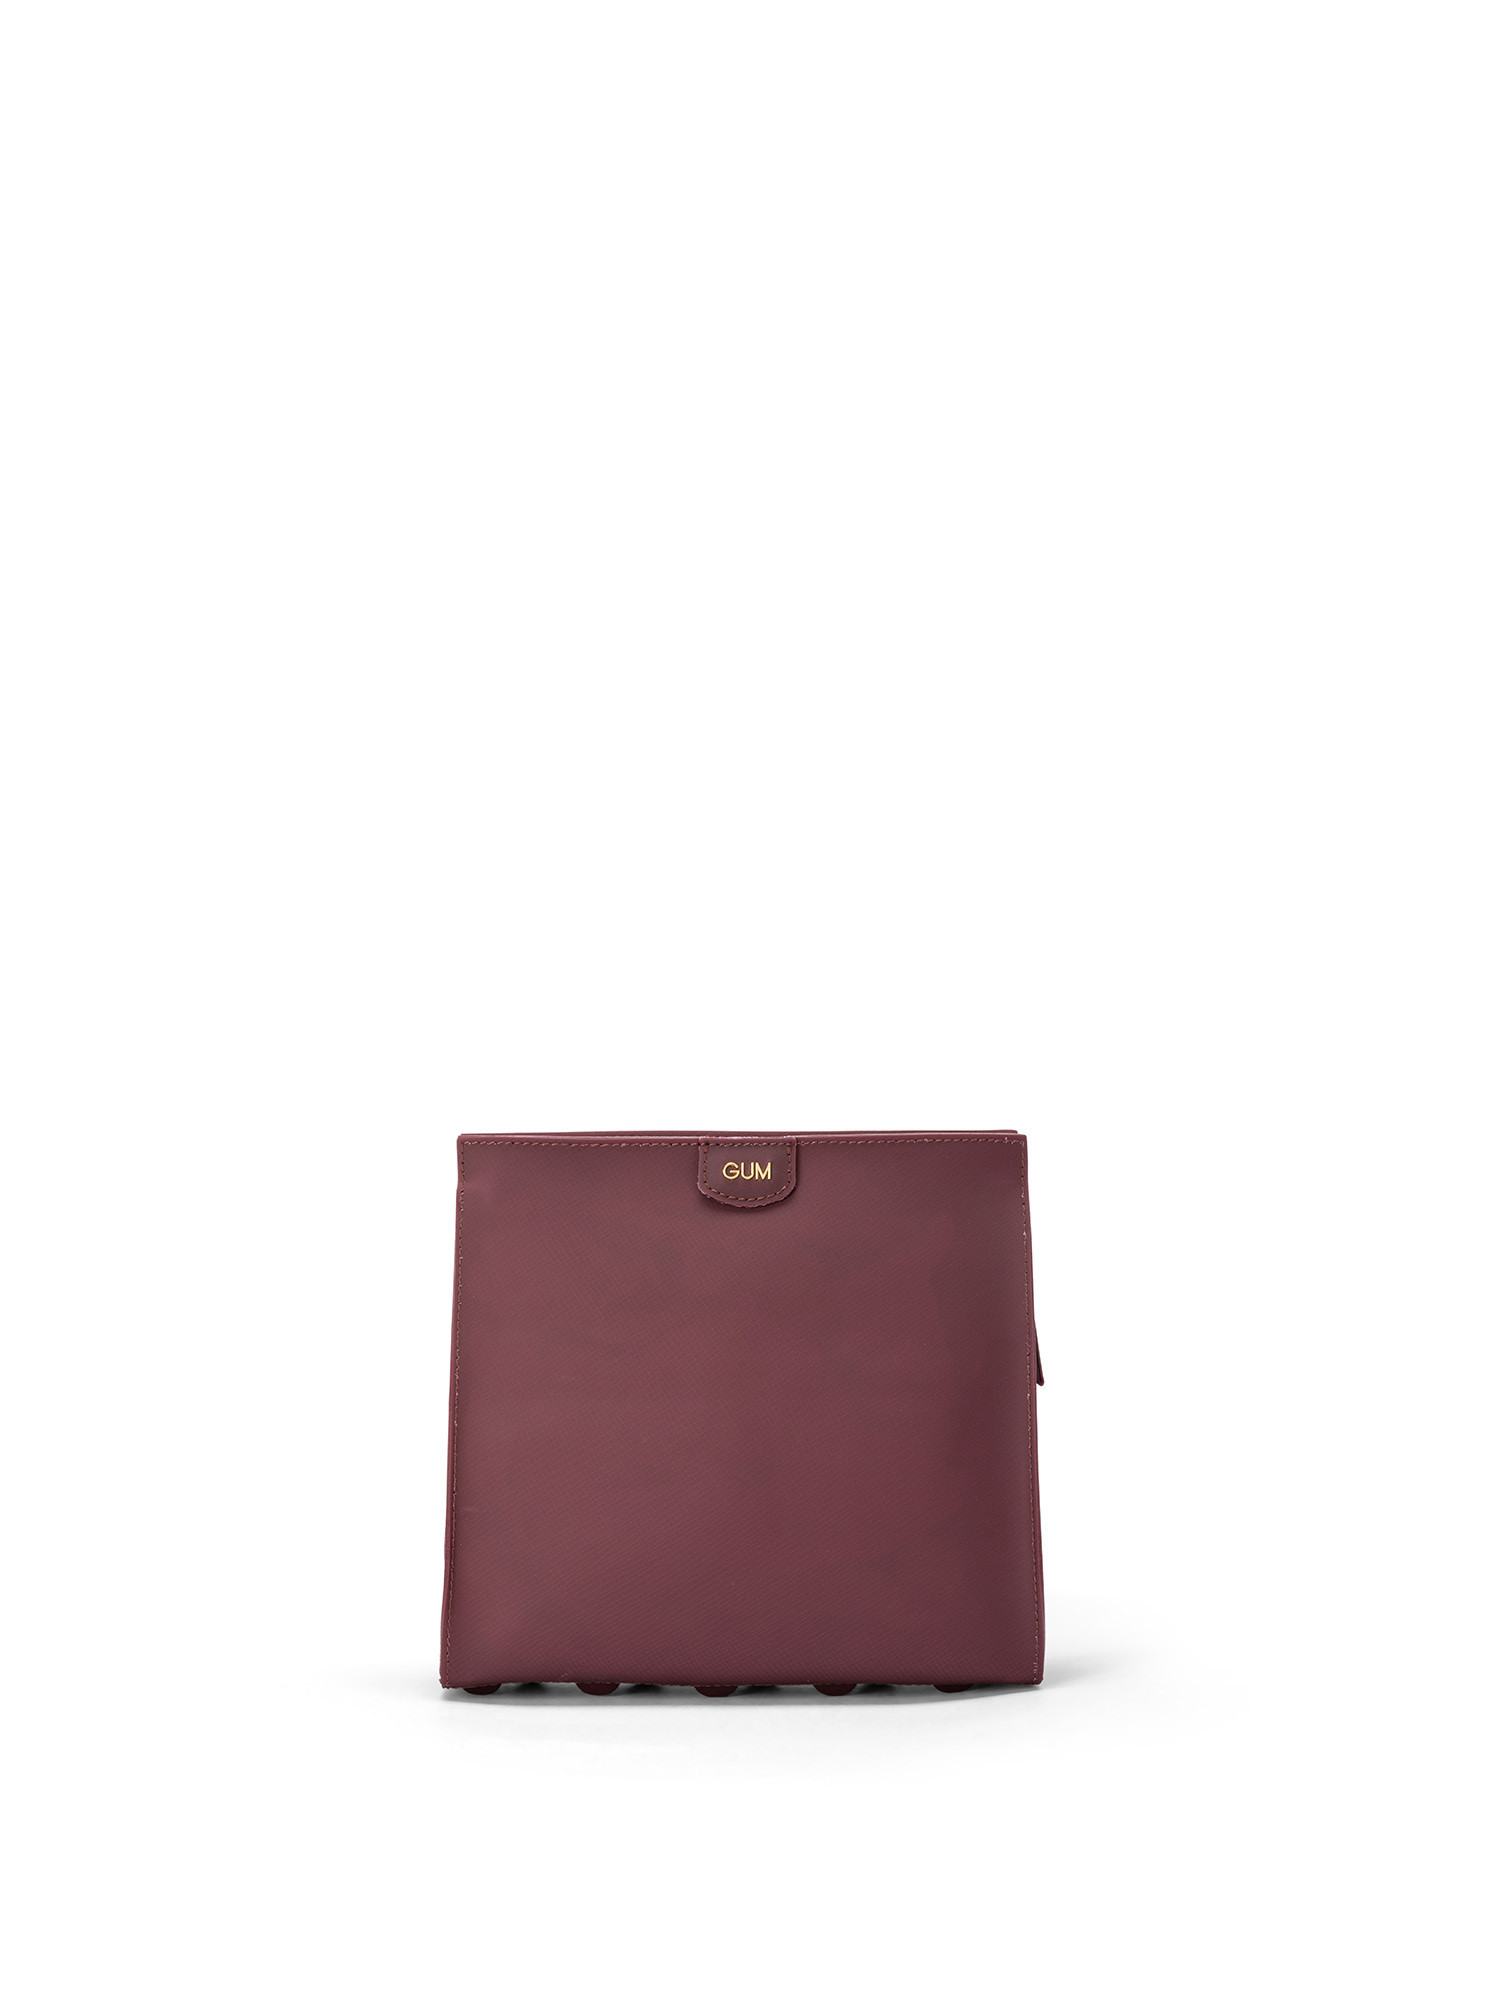 Borsa Maxi Studs a tracolla media, Rosso bordeaux, large image number 0